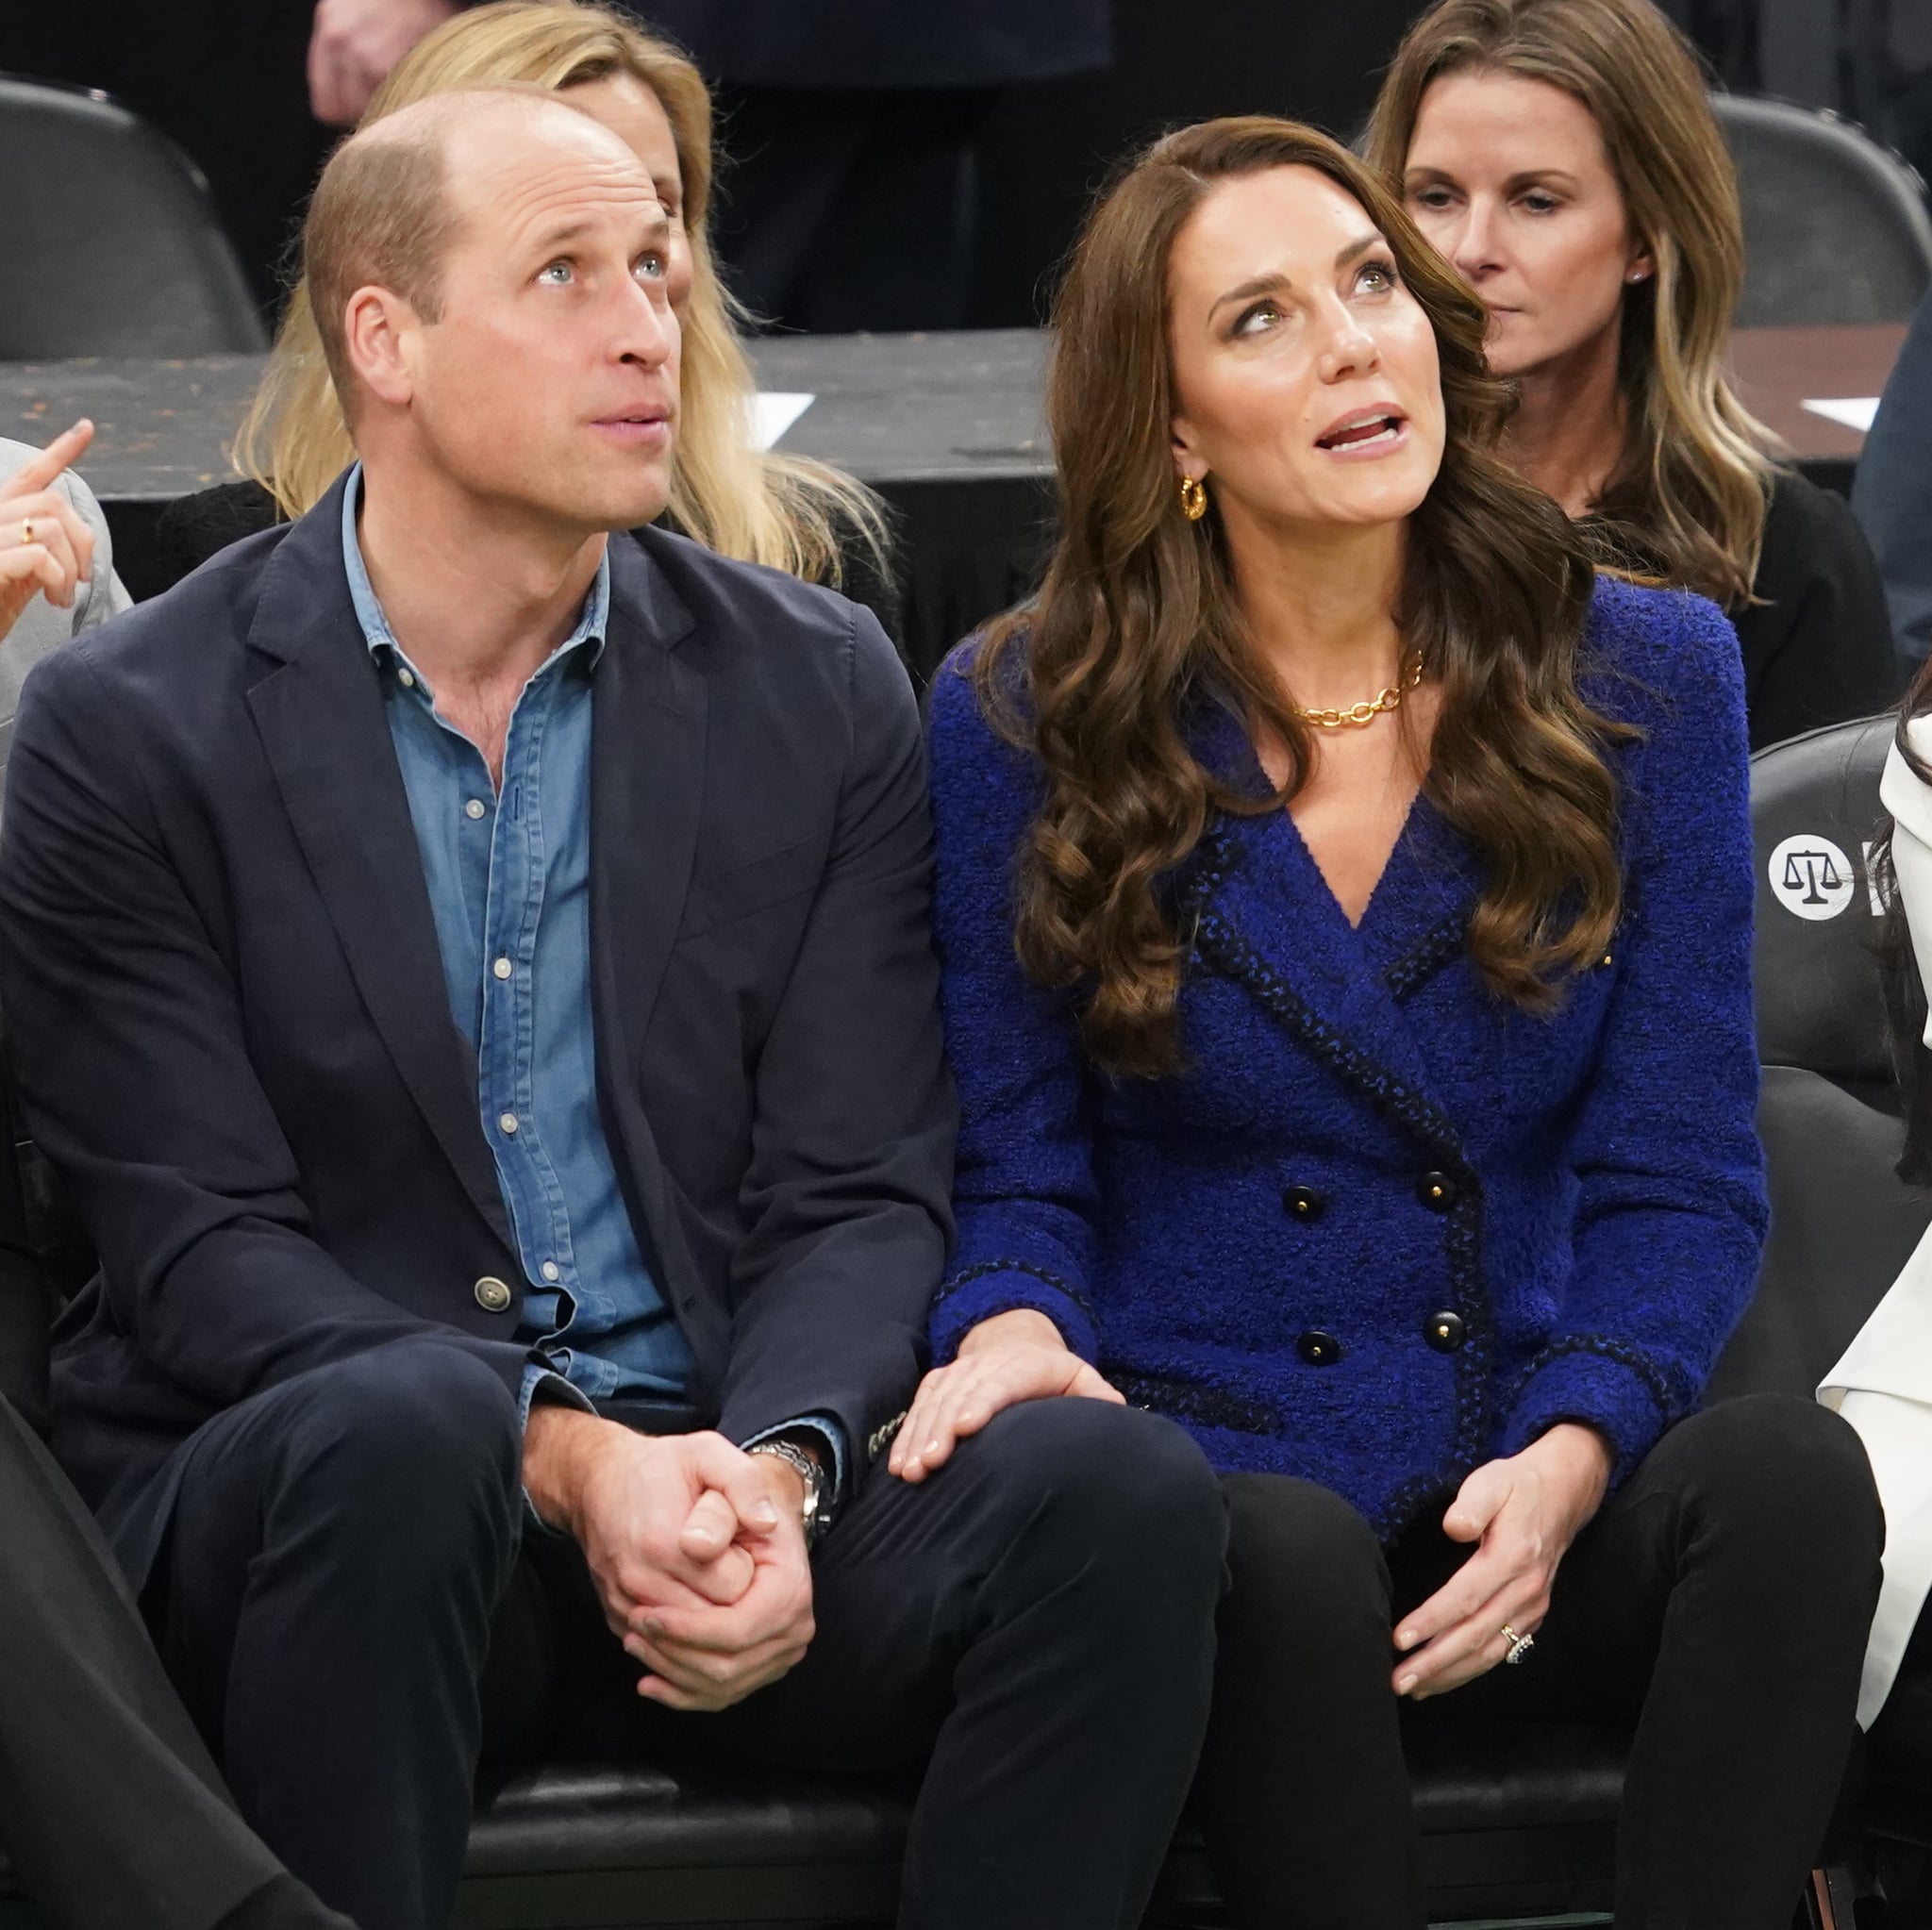 Prince William and Kate Middleton sitting courtside at an NBA game between the Boston Celtics and the Miami Heat.